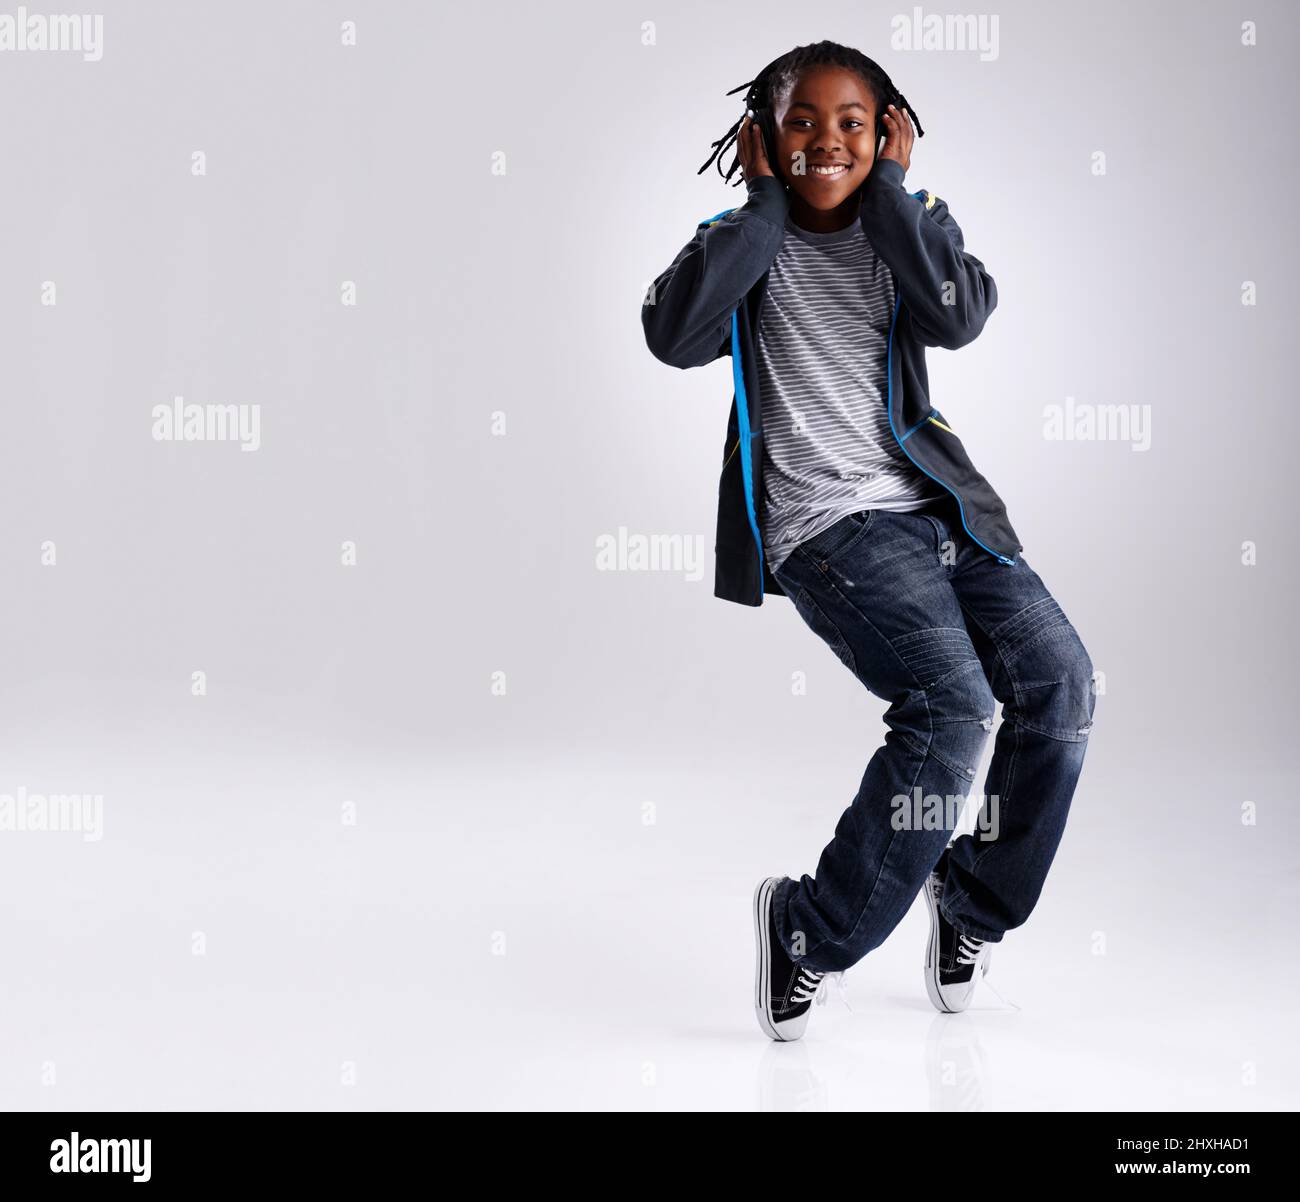 Young male hip hop dancer posing on grey background - Stock Image -  Everypixel